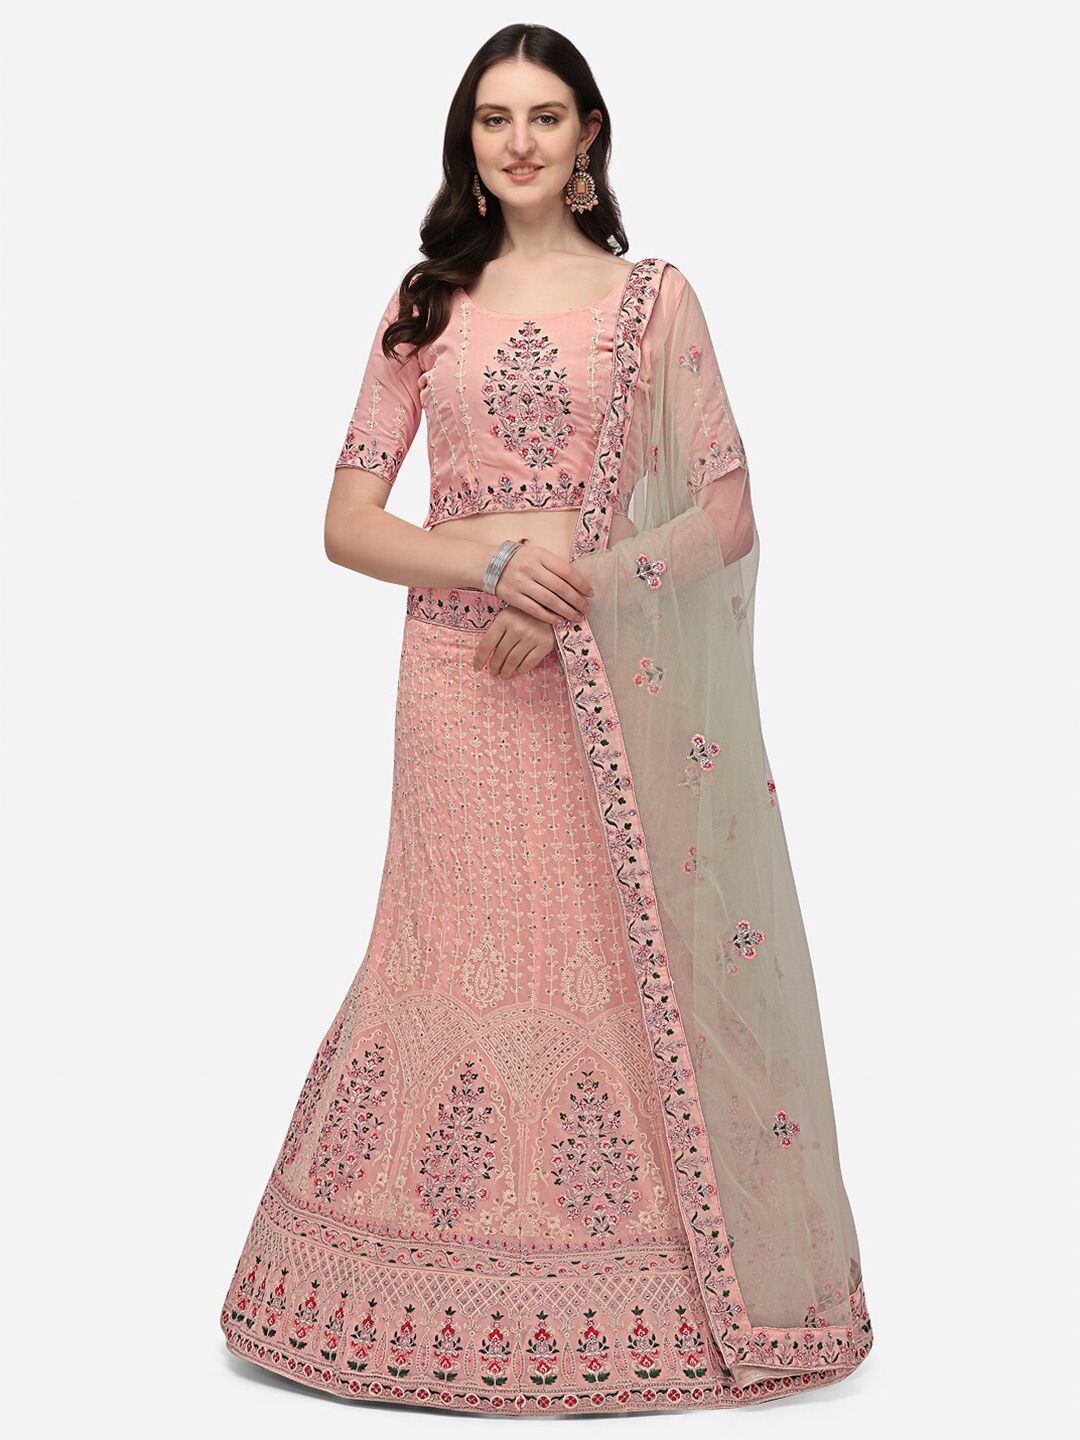 VRSALES Peach-Coloured & Red Embroidered Semi-Stitched Lehenga & Unstitched Blouse With Dupatta Price in India